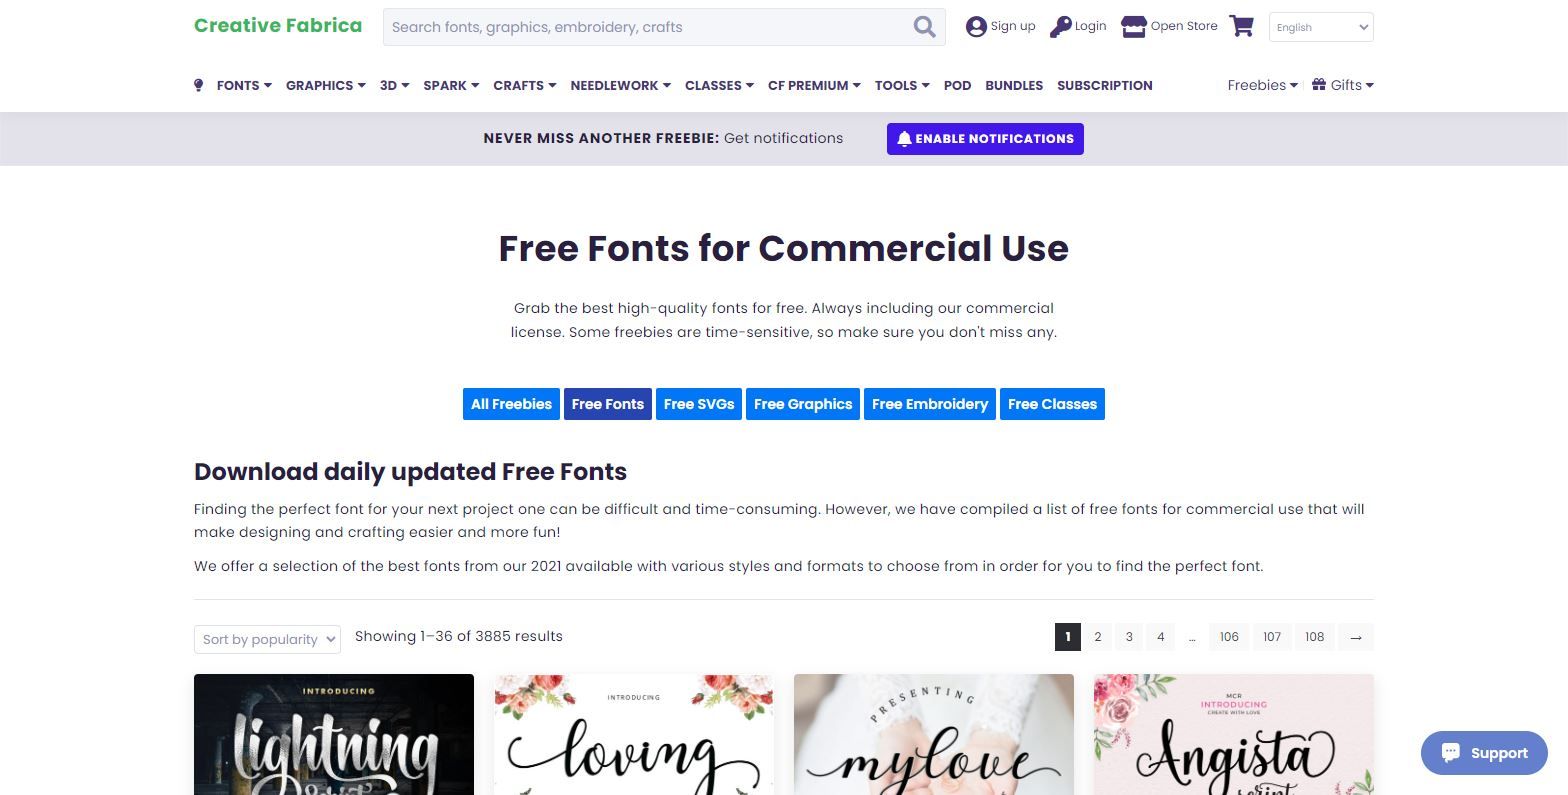 A Screenshot of the Copyright free Fonts for Commercial Use Available from Creative Fabrica